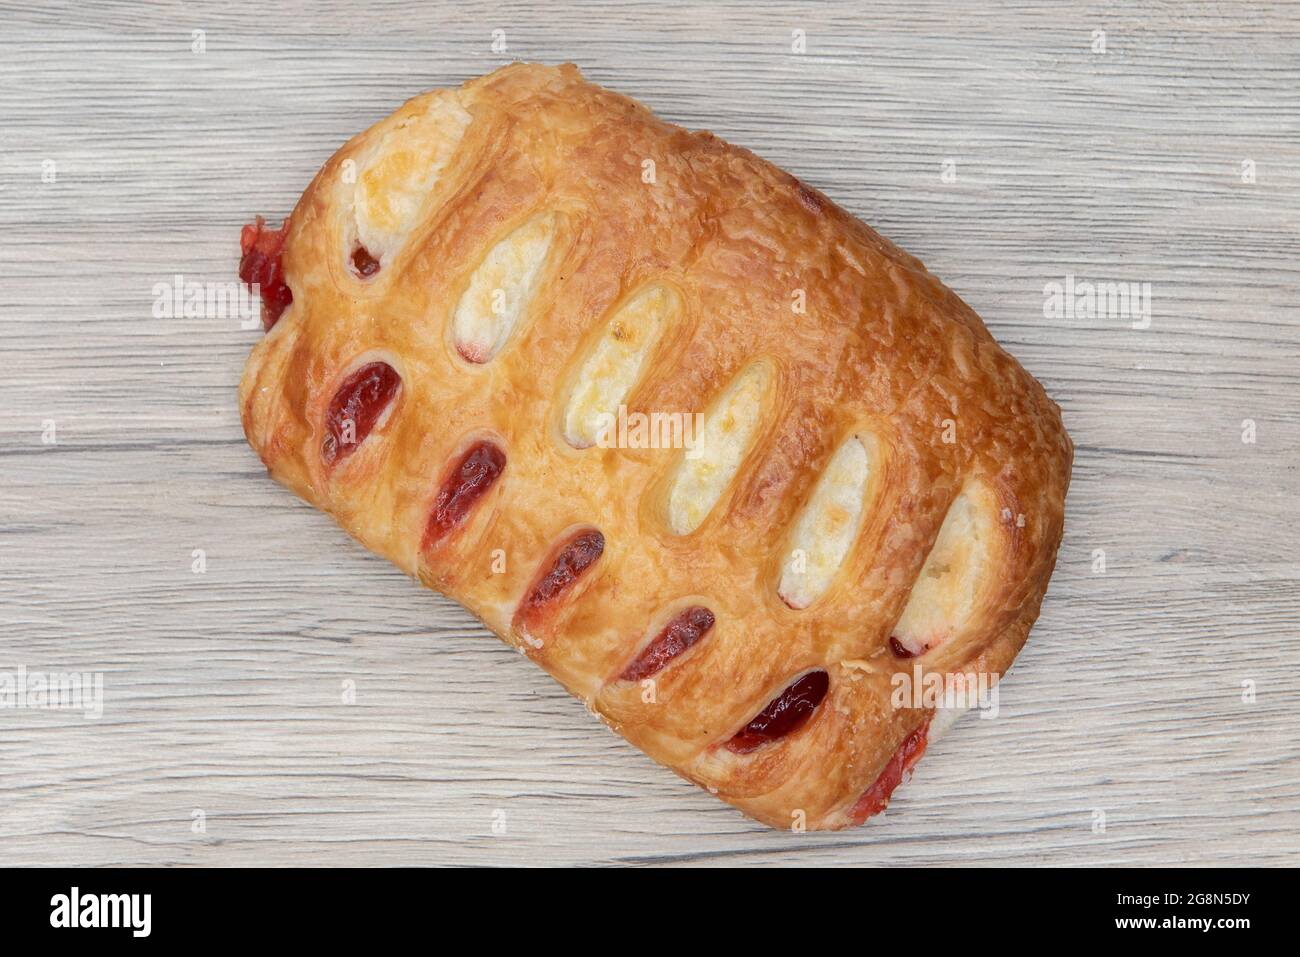 Overhead view of ham and cheese croissant sandwich is textured with flakey crust for a breakfast treat delight. Stock Photo